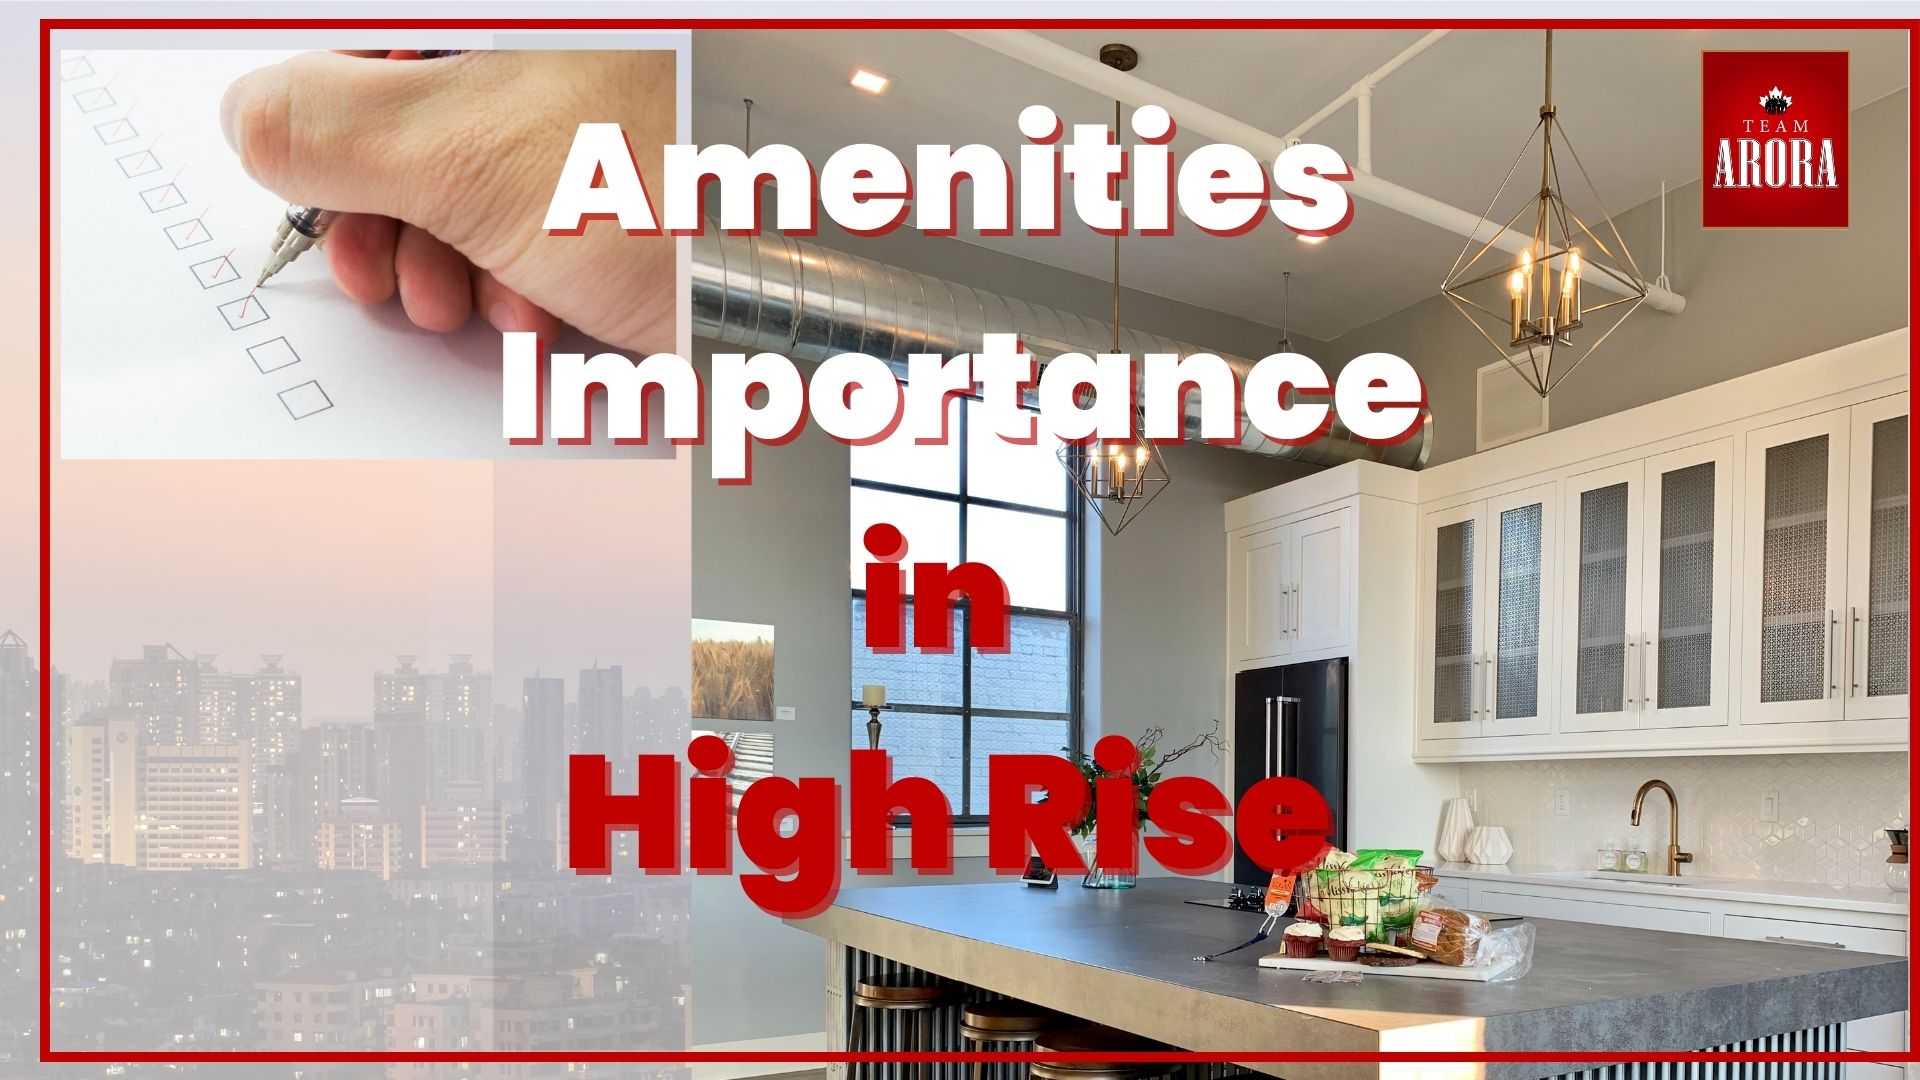 How Important are Amenities in a High Rise?